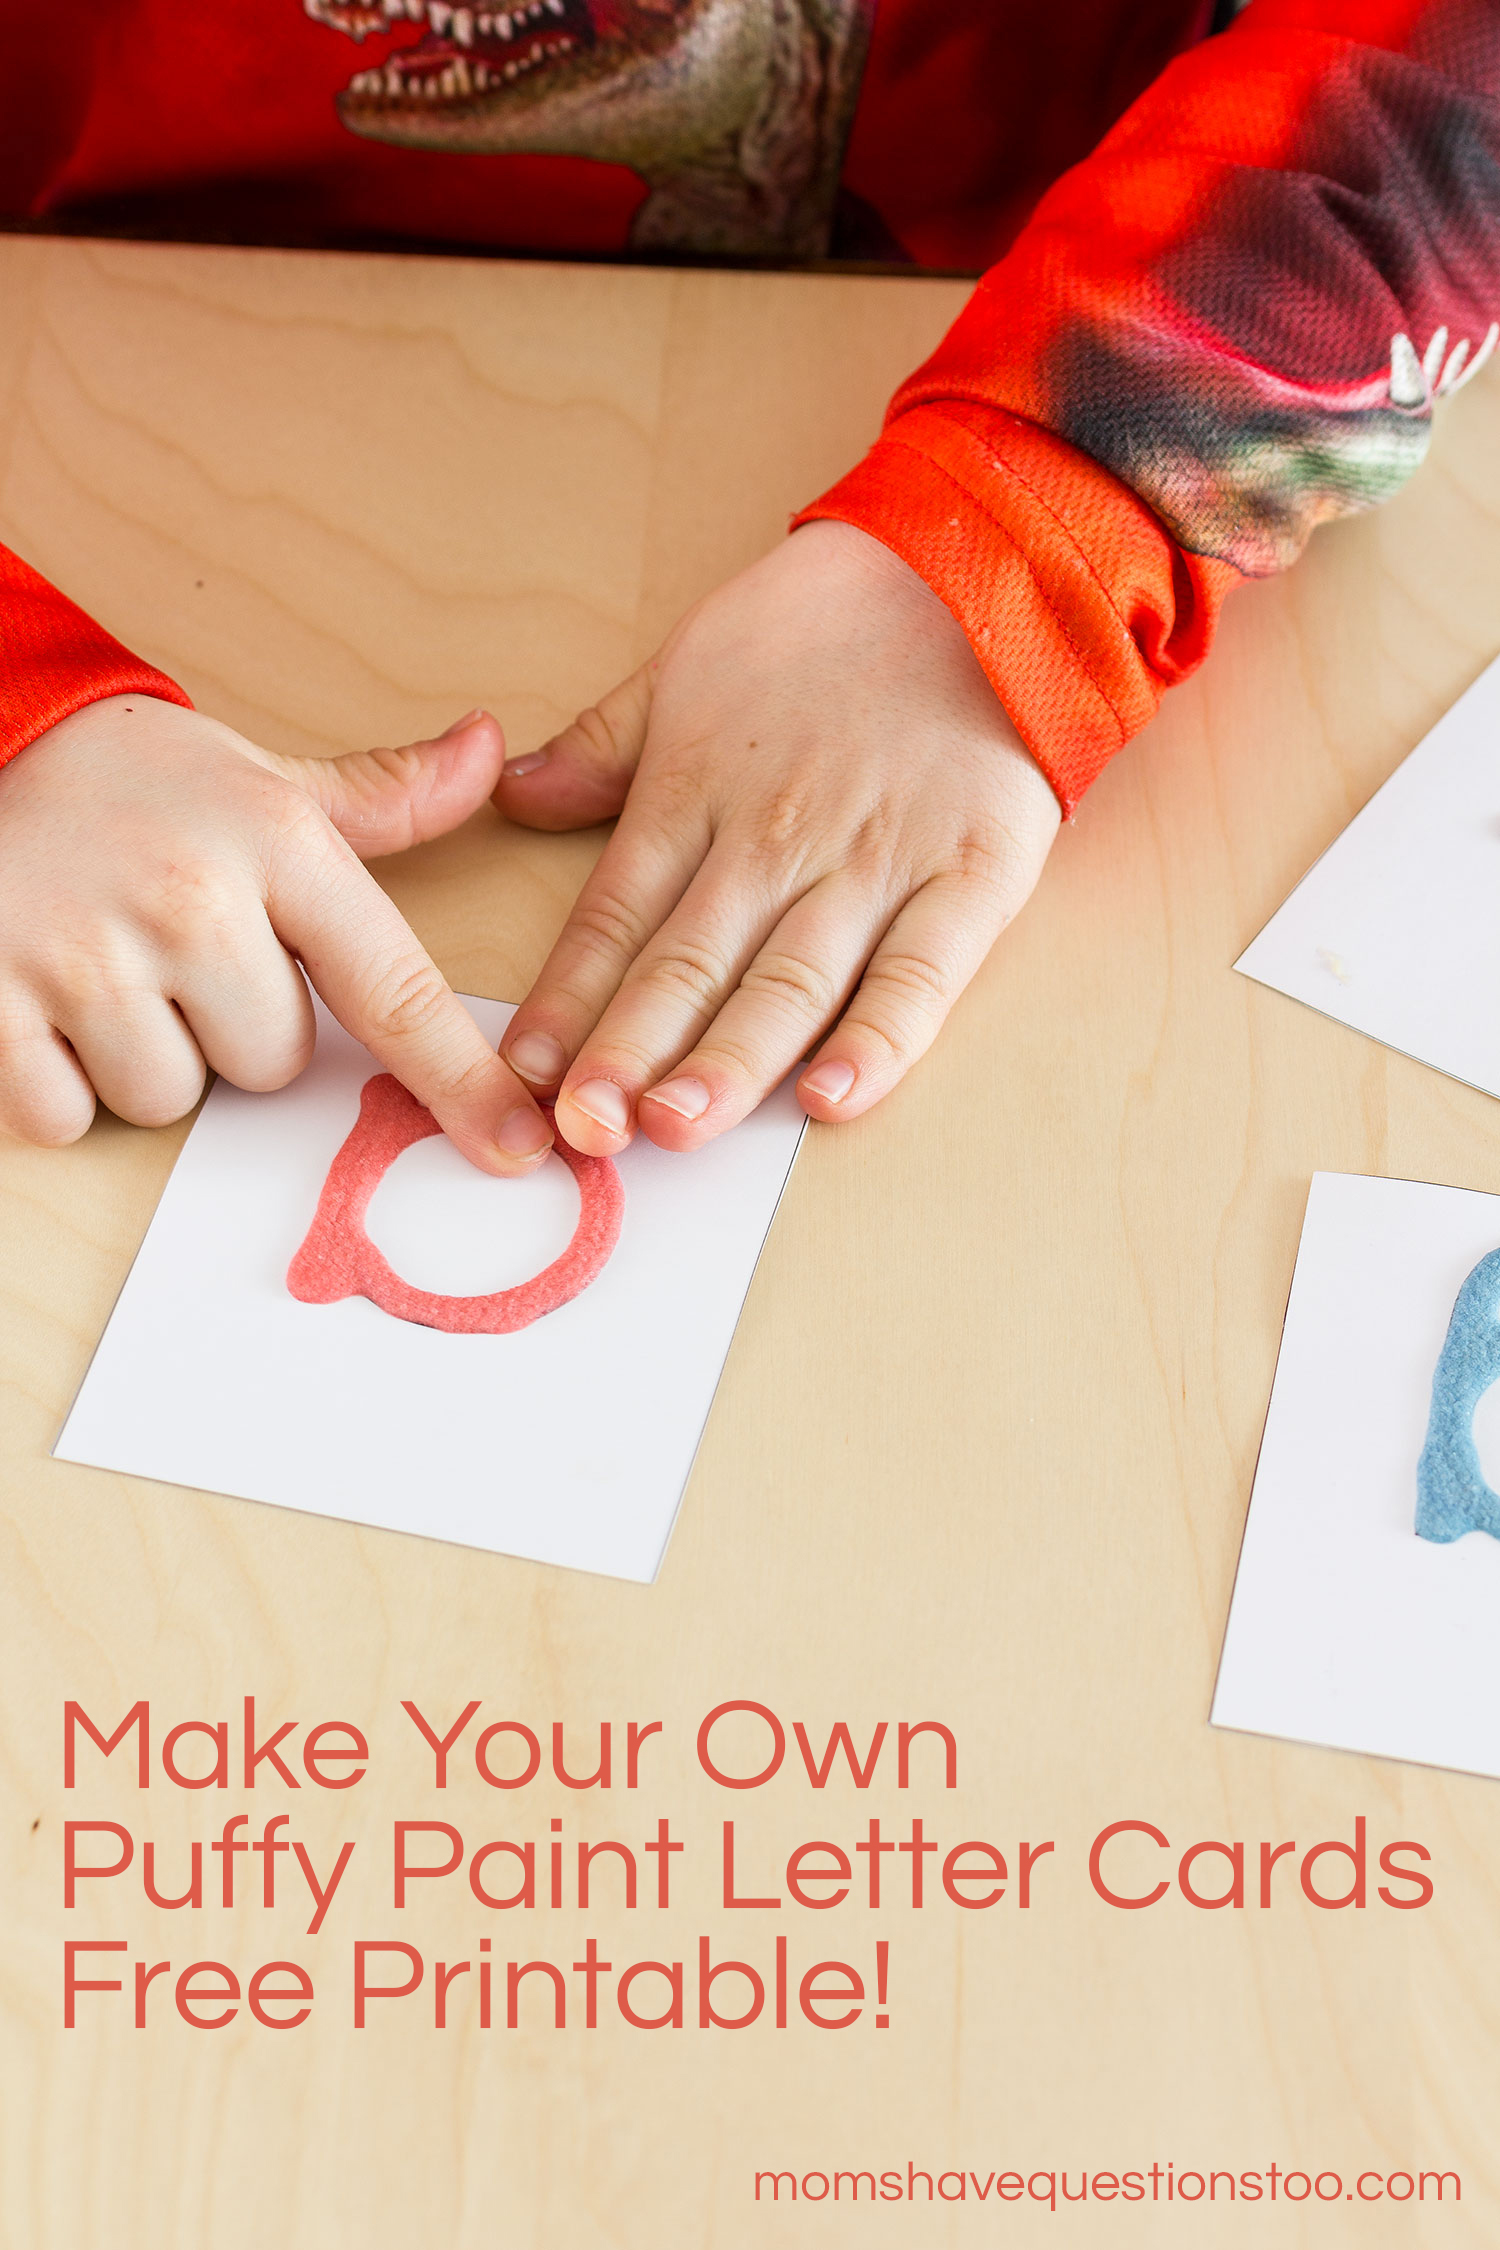 Puffy Paint Letter Cards Montessori Sandpaper Letters Alternative Moms Have Questions Too